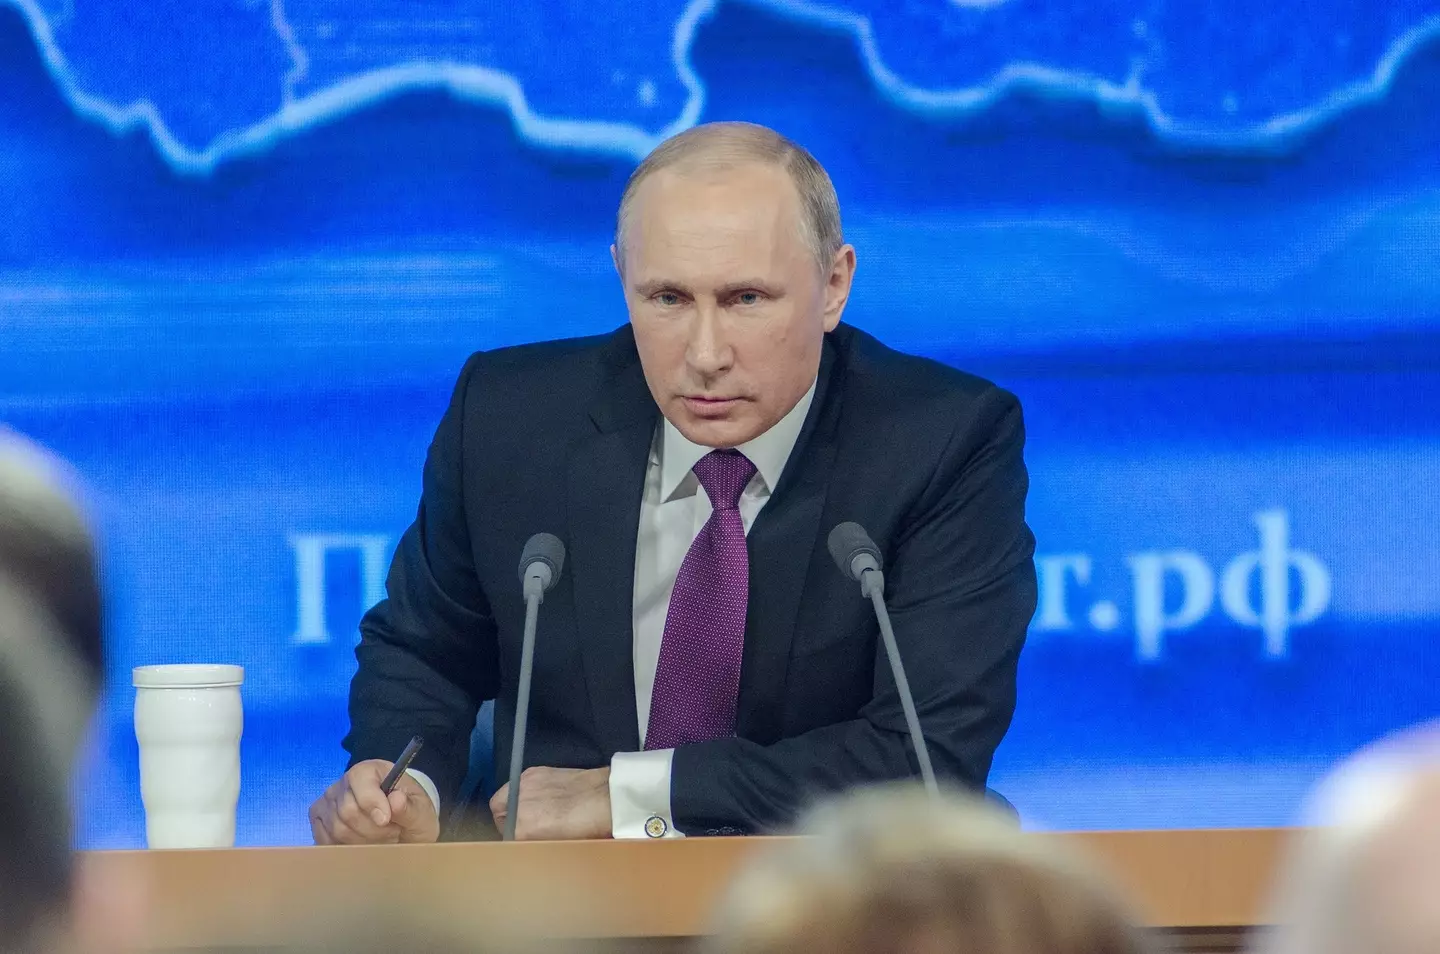 Vladimir Putin's tactics will take a decade to solve, according to the UK.